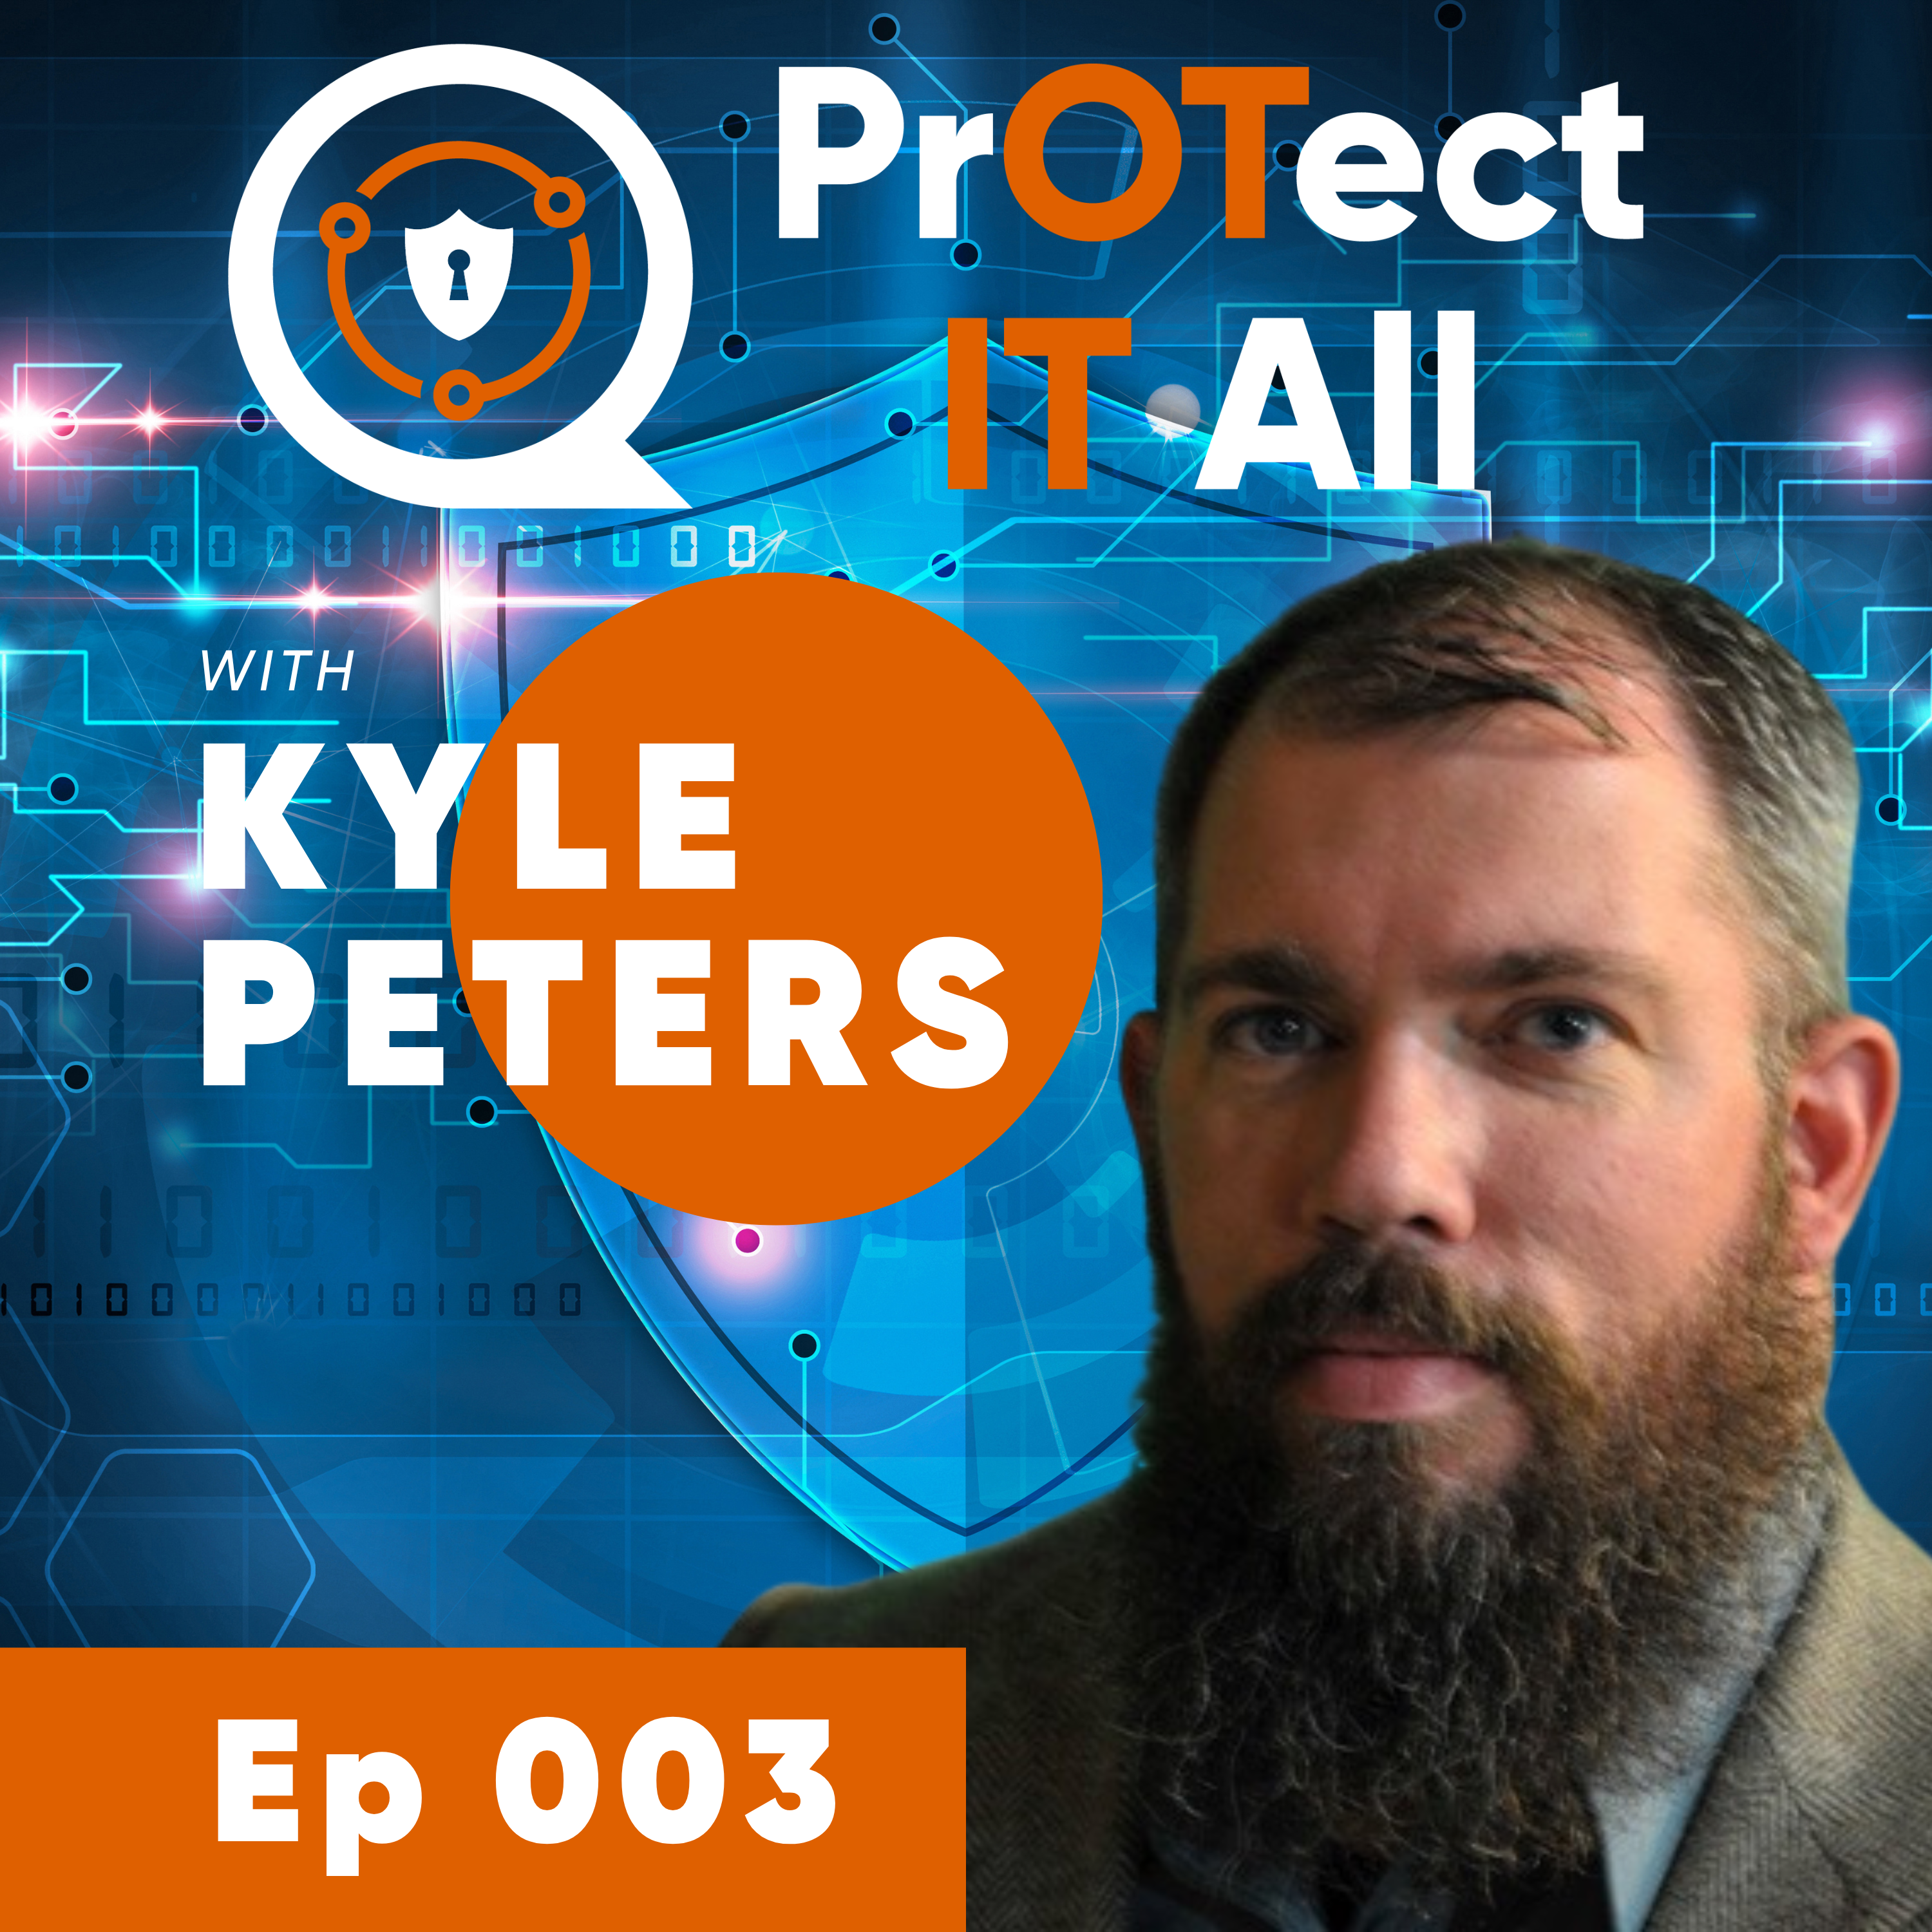 Exploring the OT Landscape: Insights from Building Management with Kyle Peters